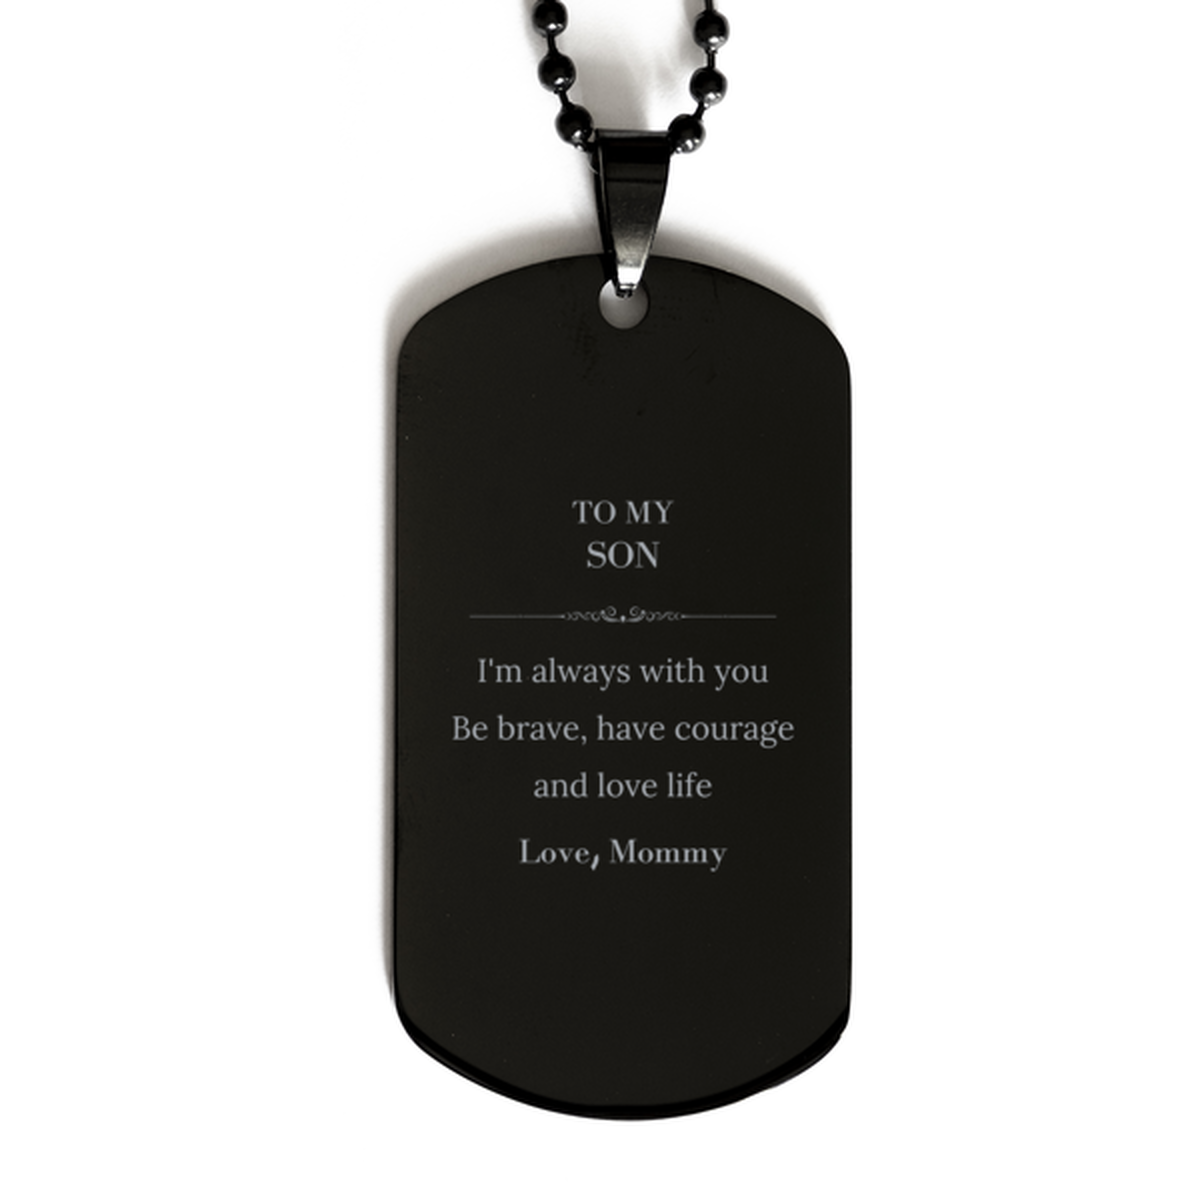 To My Son Gifts from Mommy, Unique Black Dog Tag Inspirational Christmas Birthday Graduation Gifts for Son I'm always with you. Be brave, have courage and love life. Love, Mommy